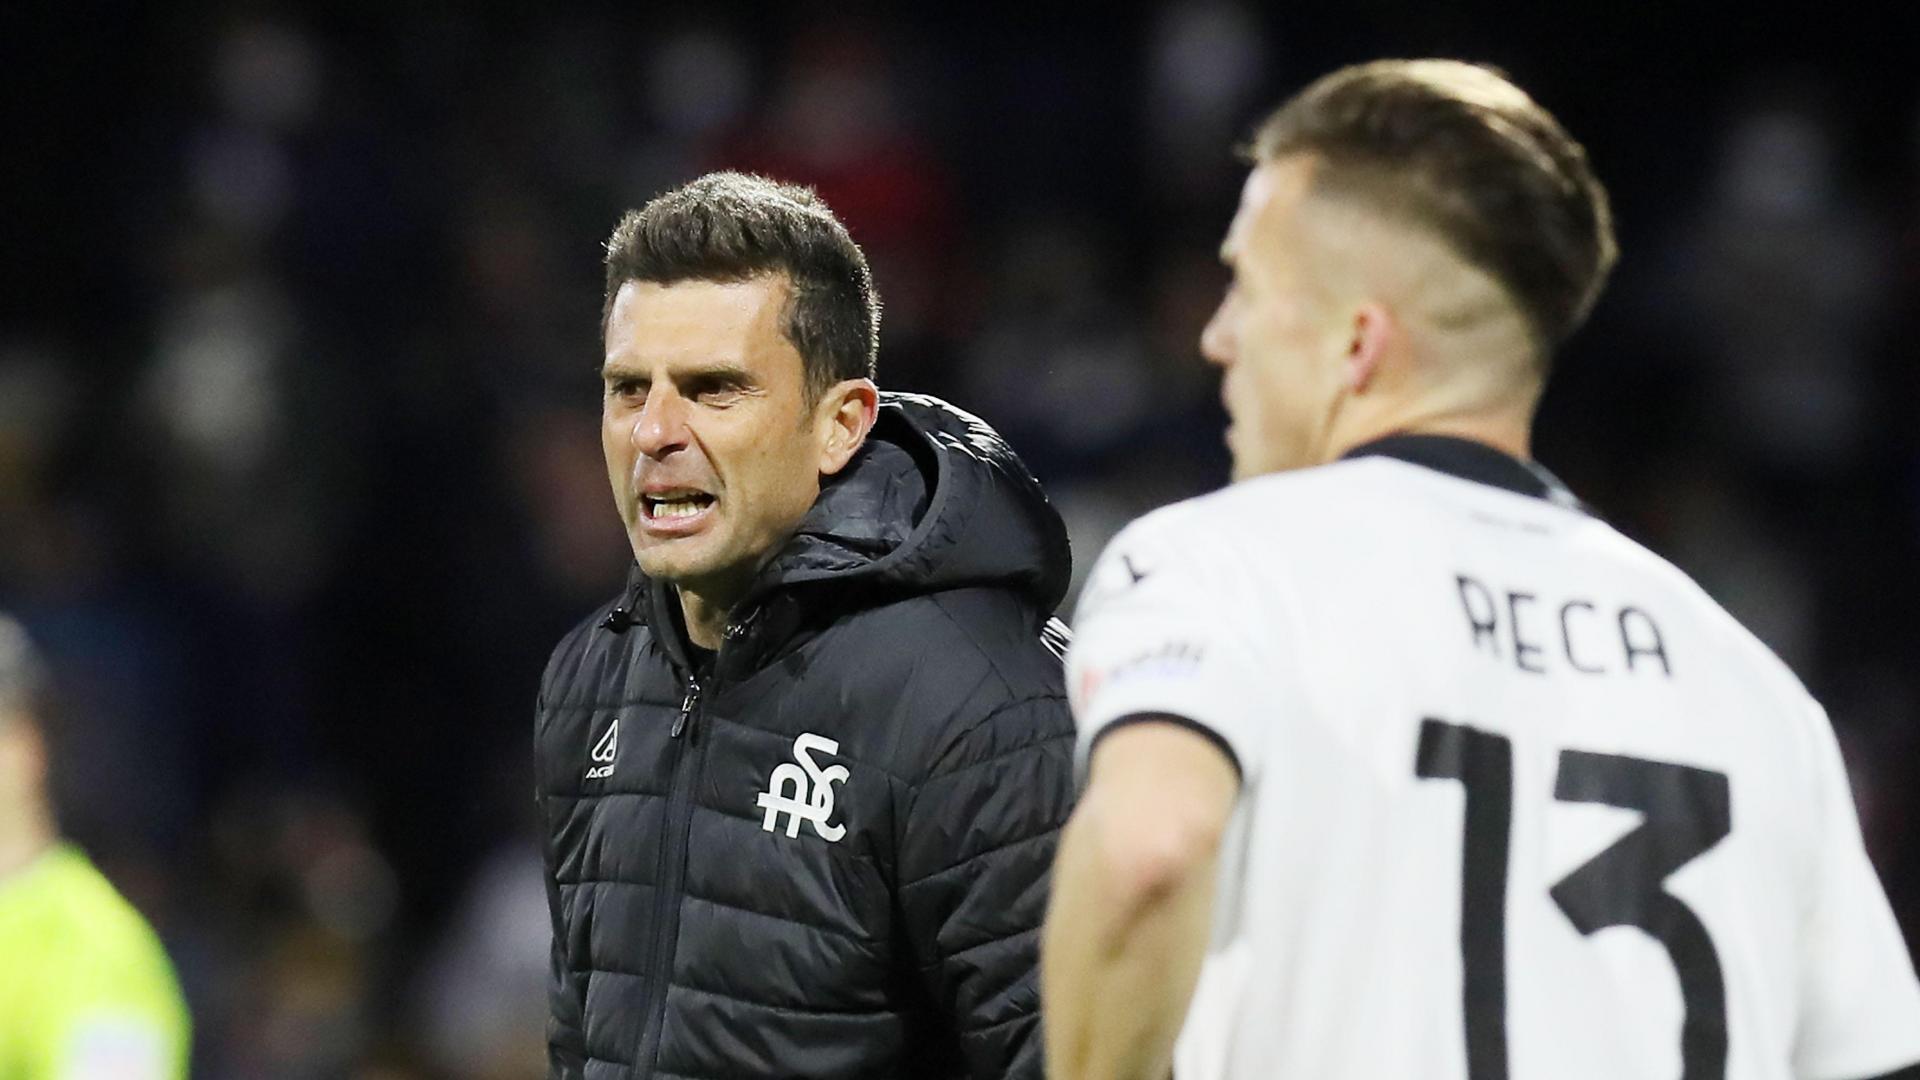 Thiago Motta: "focused on the team, on our present, and on the future"